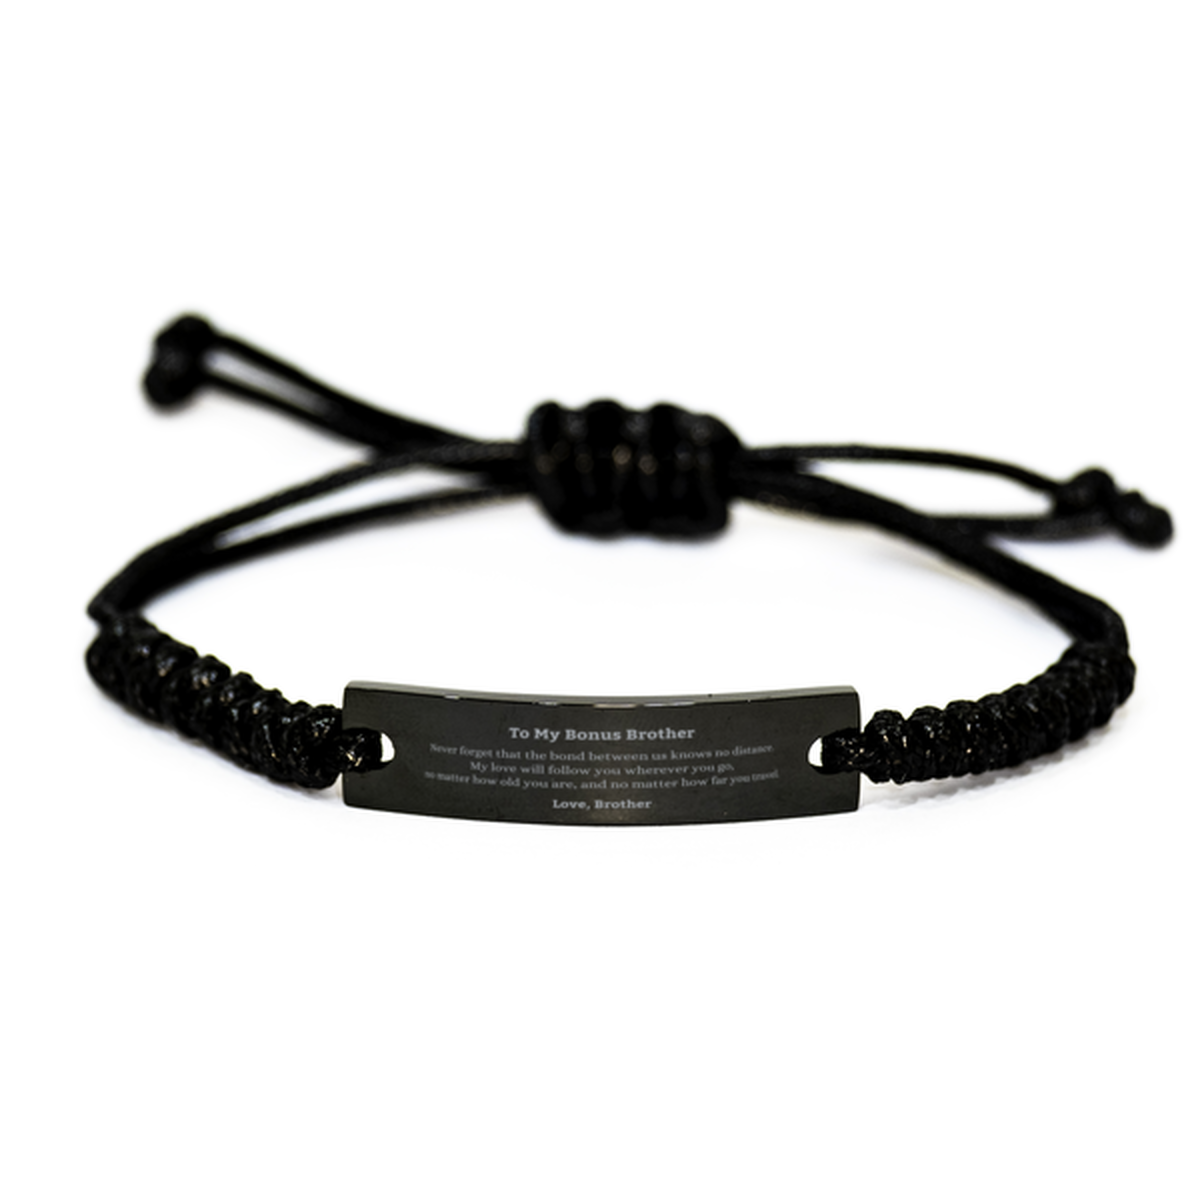 Bonus Brother Birthday Gifts from Brother, Adjustable Black Rope Bracelet for Bonus Brother Christmas Graduation Unique Gifts Bonus Brother Never forget that the bond between us knows no distance. Love, Brother